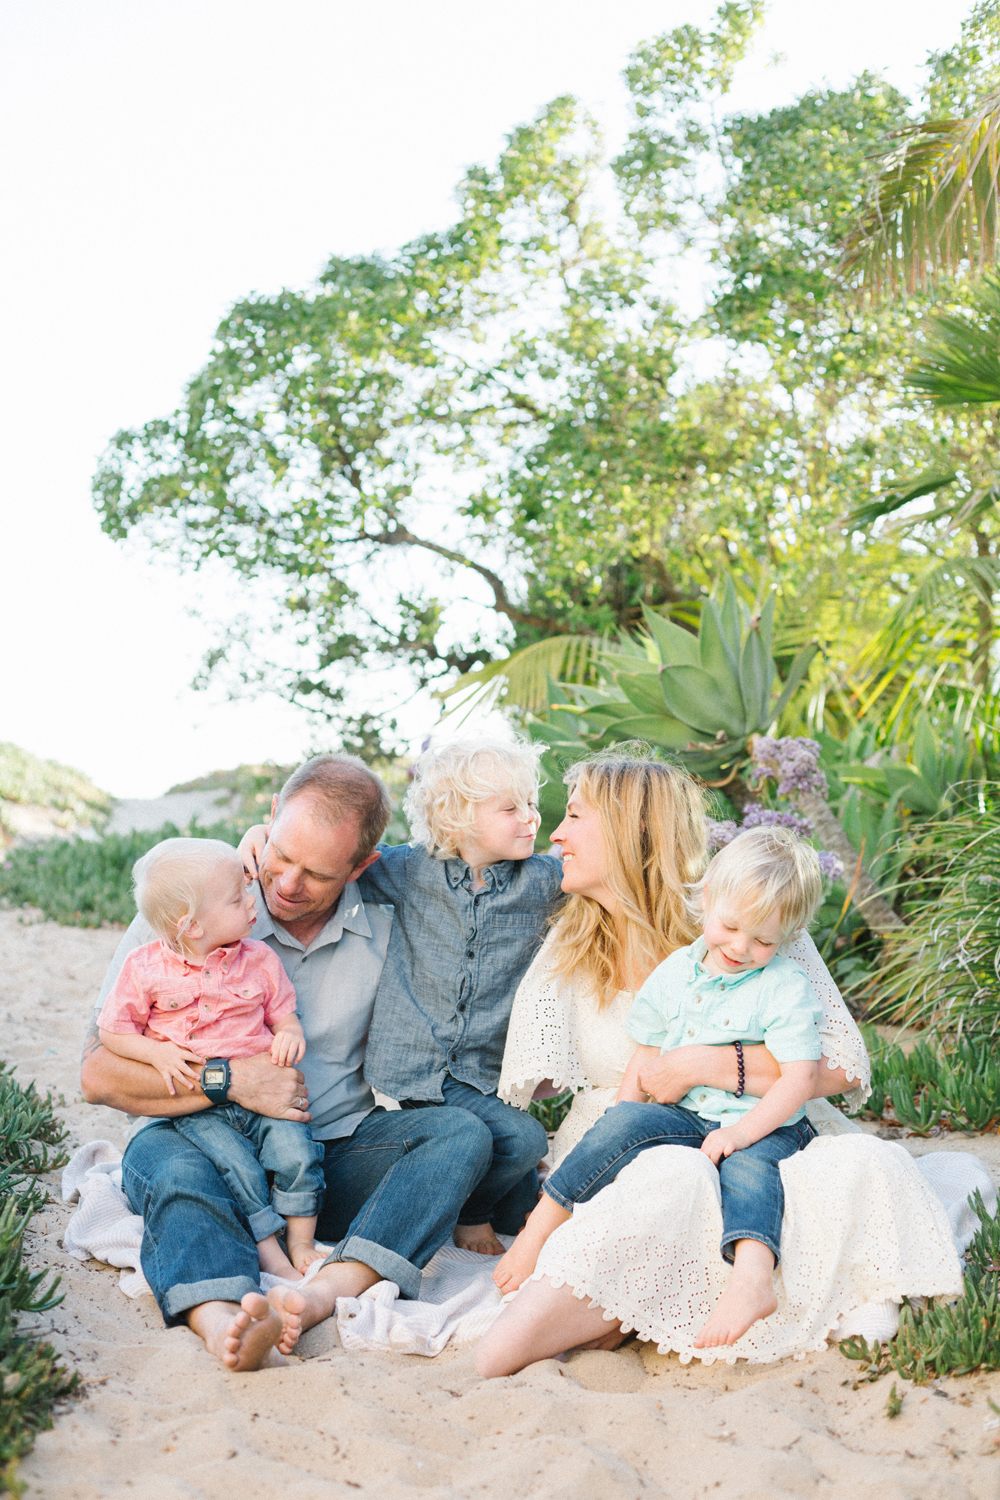 10 tips for your next family photo session with Alison Bernier